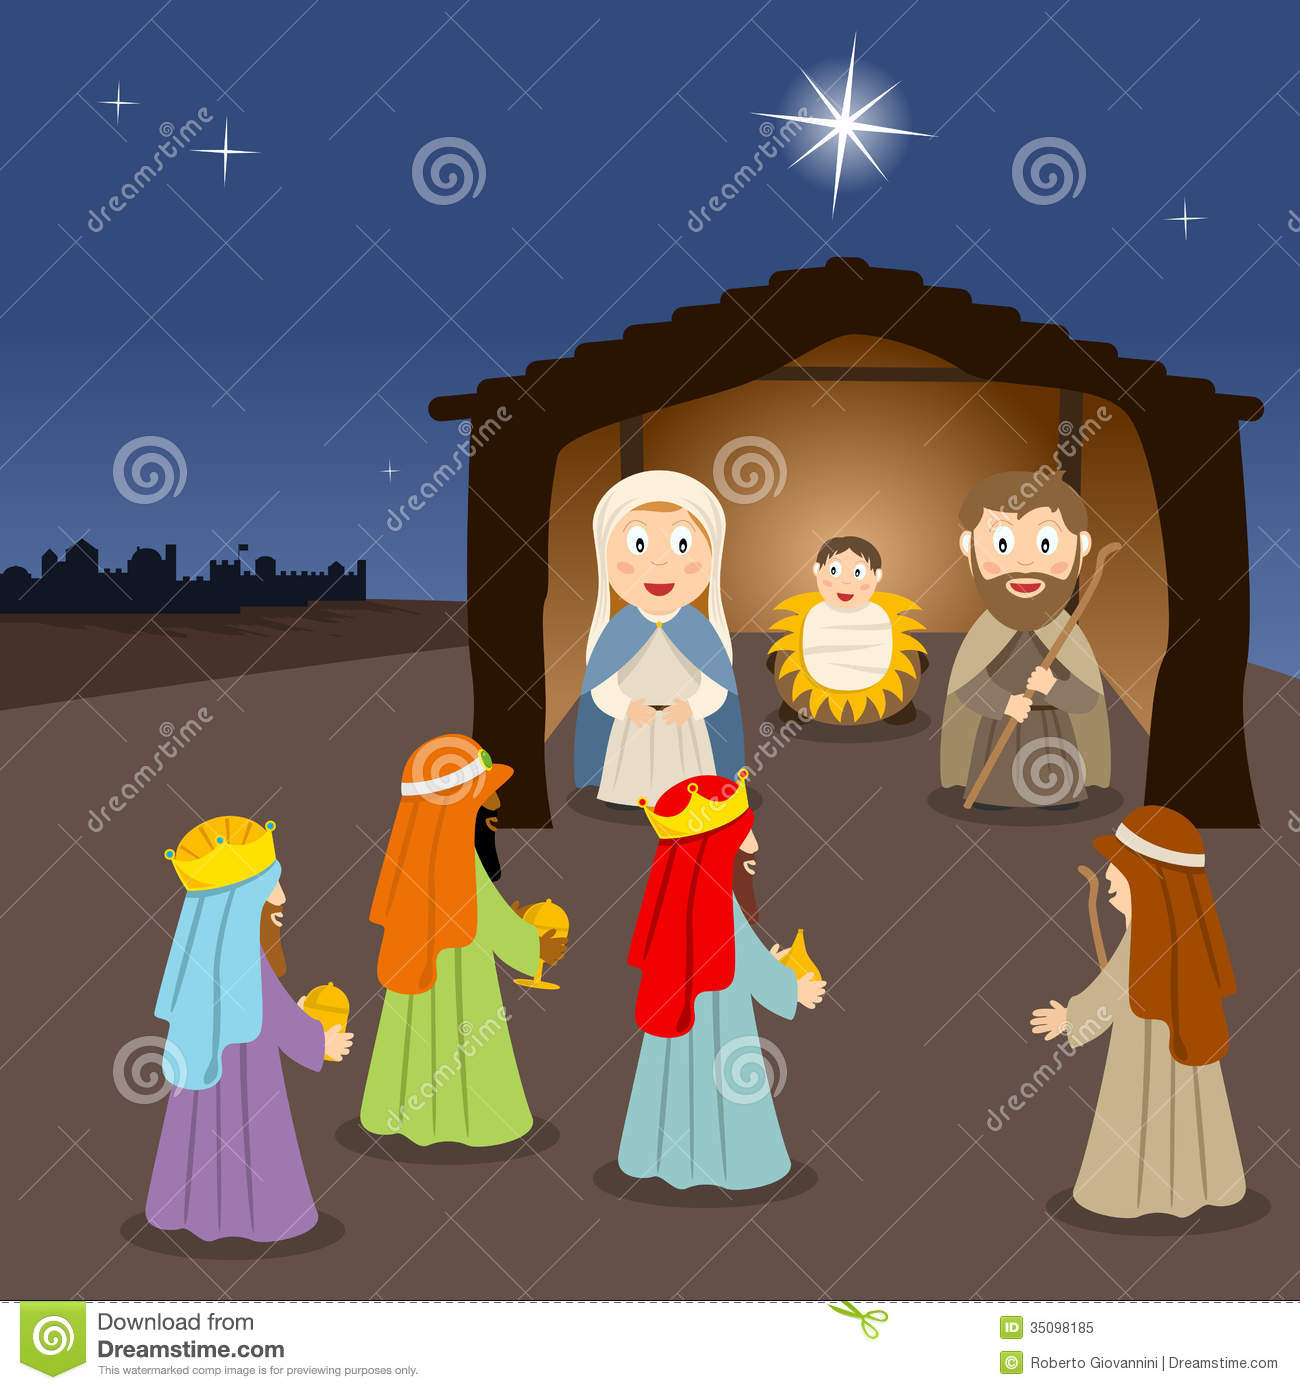 Christmas Nativity Scene With Mary Joseph And Jesus In The Manger    